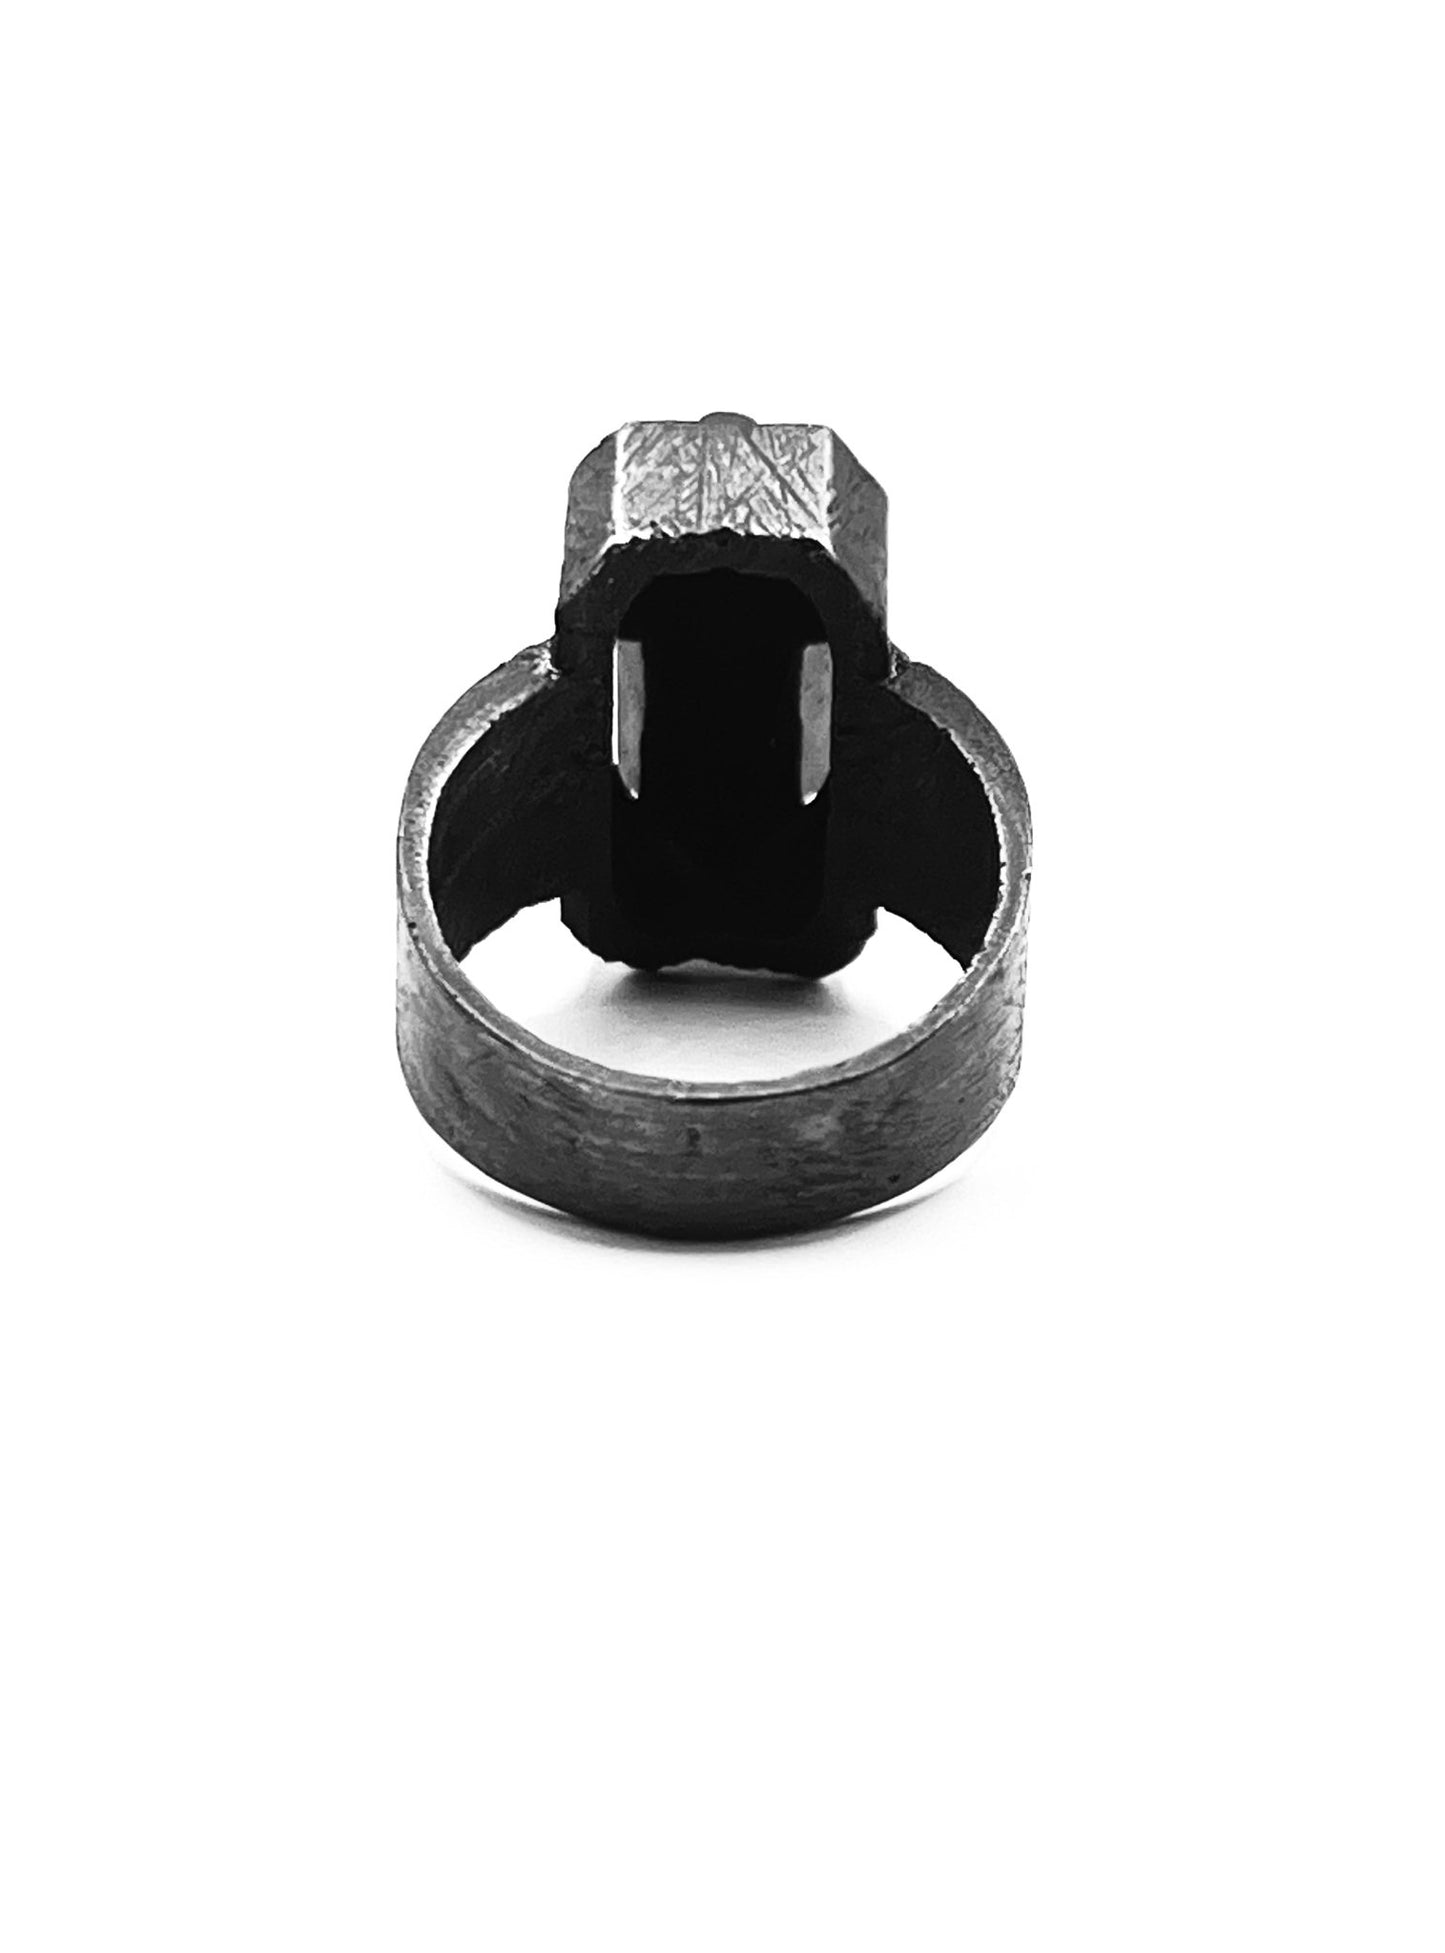 Brutalist Black Onyx Ring by Julian the 2nd - Nocturne LLC